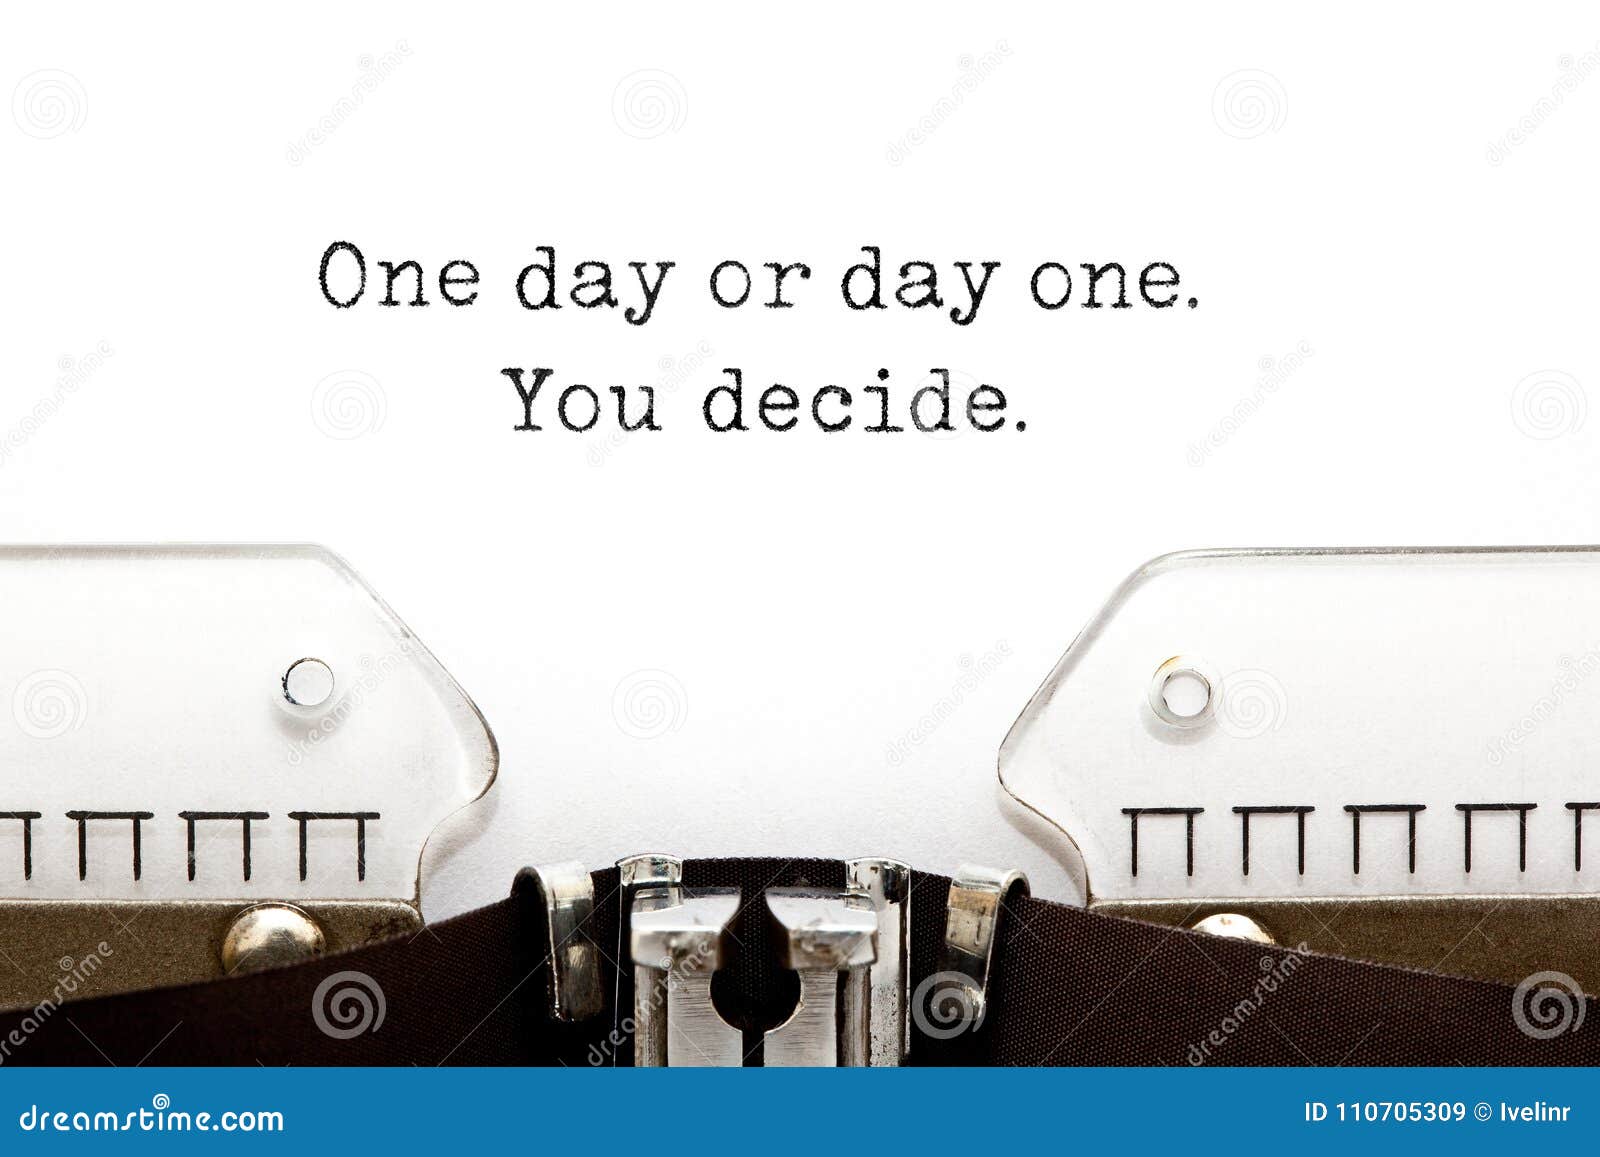 one day or day one you decide on typewriter